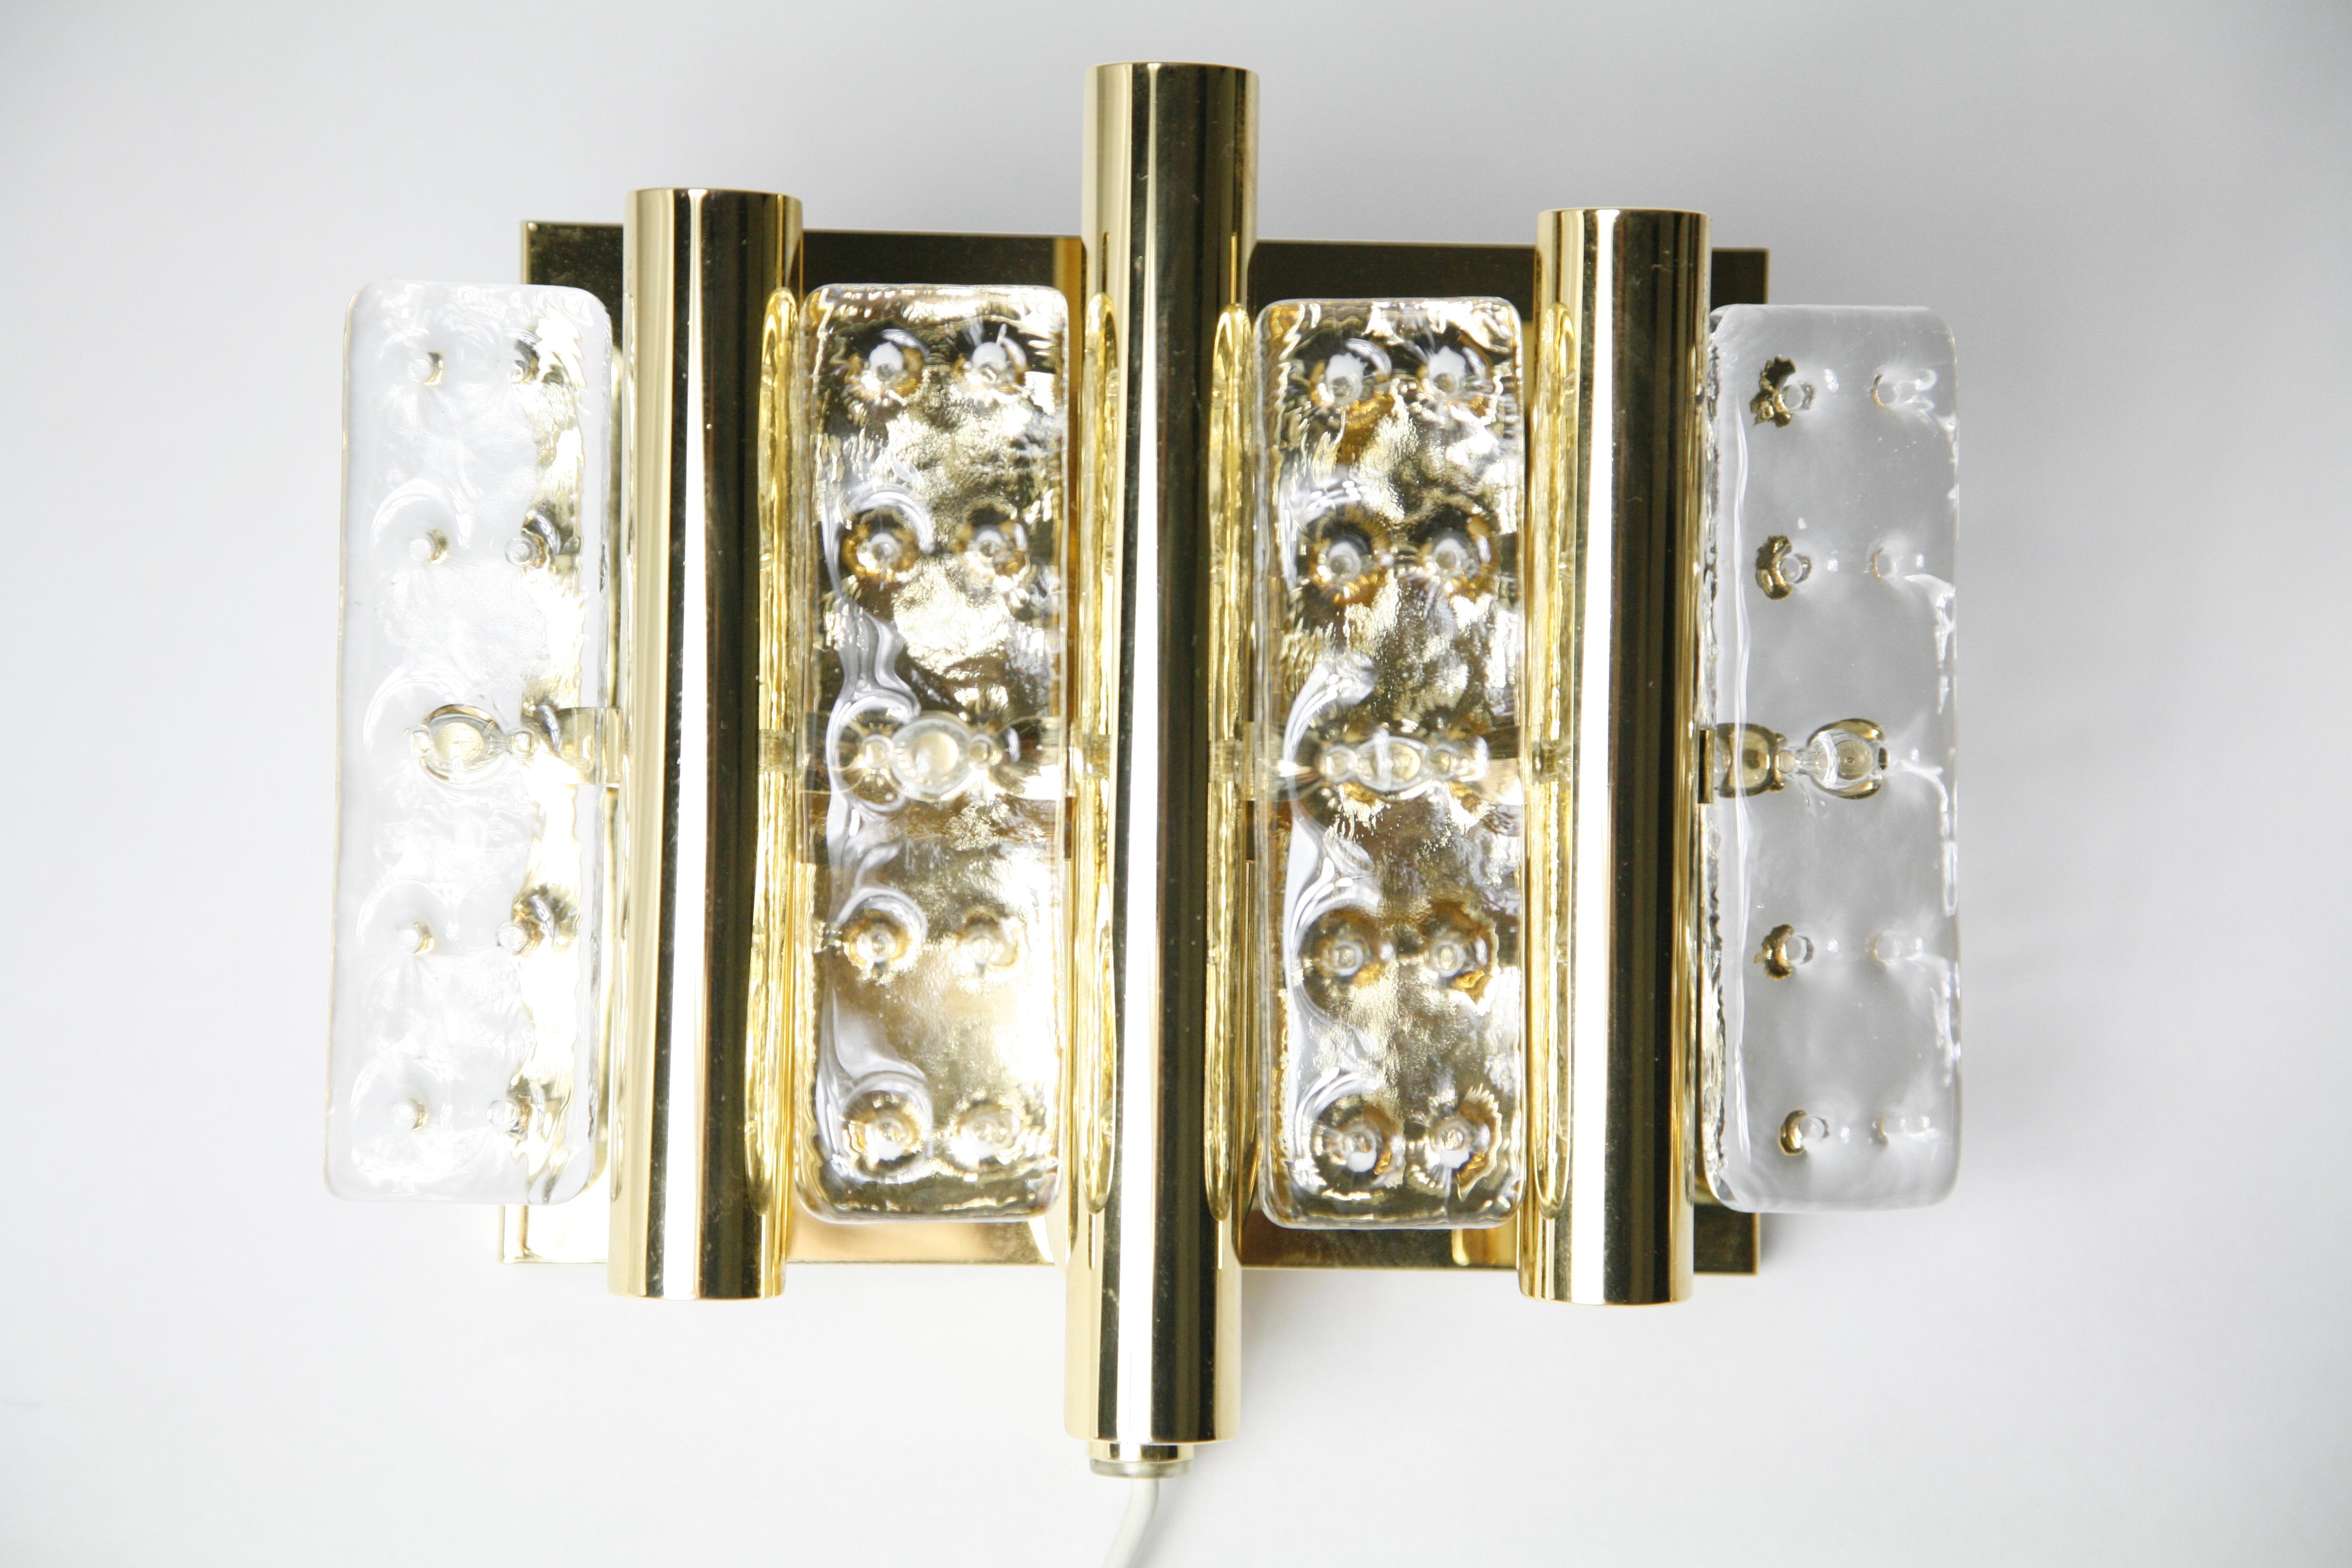 Pair of Flygsfors brass sconces glass elements, Sweden, 1970, brass bases that is gilded with 4 pieces og pressed crystal glass as shades on each sconce in excellent condition.
Hold one candelabra bulb each.